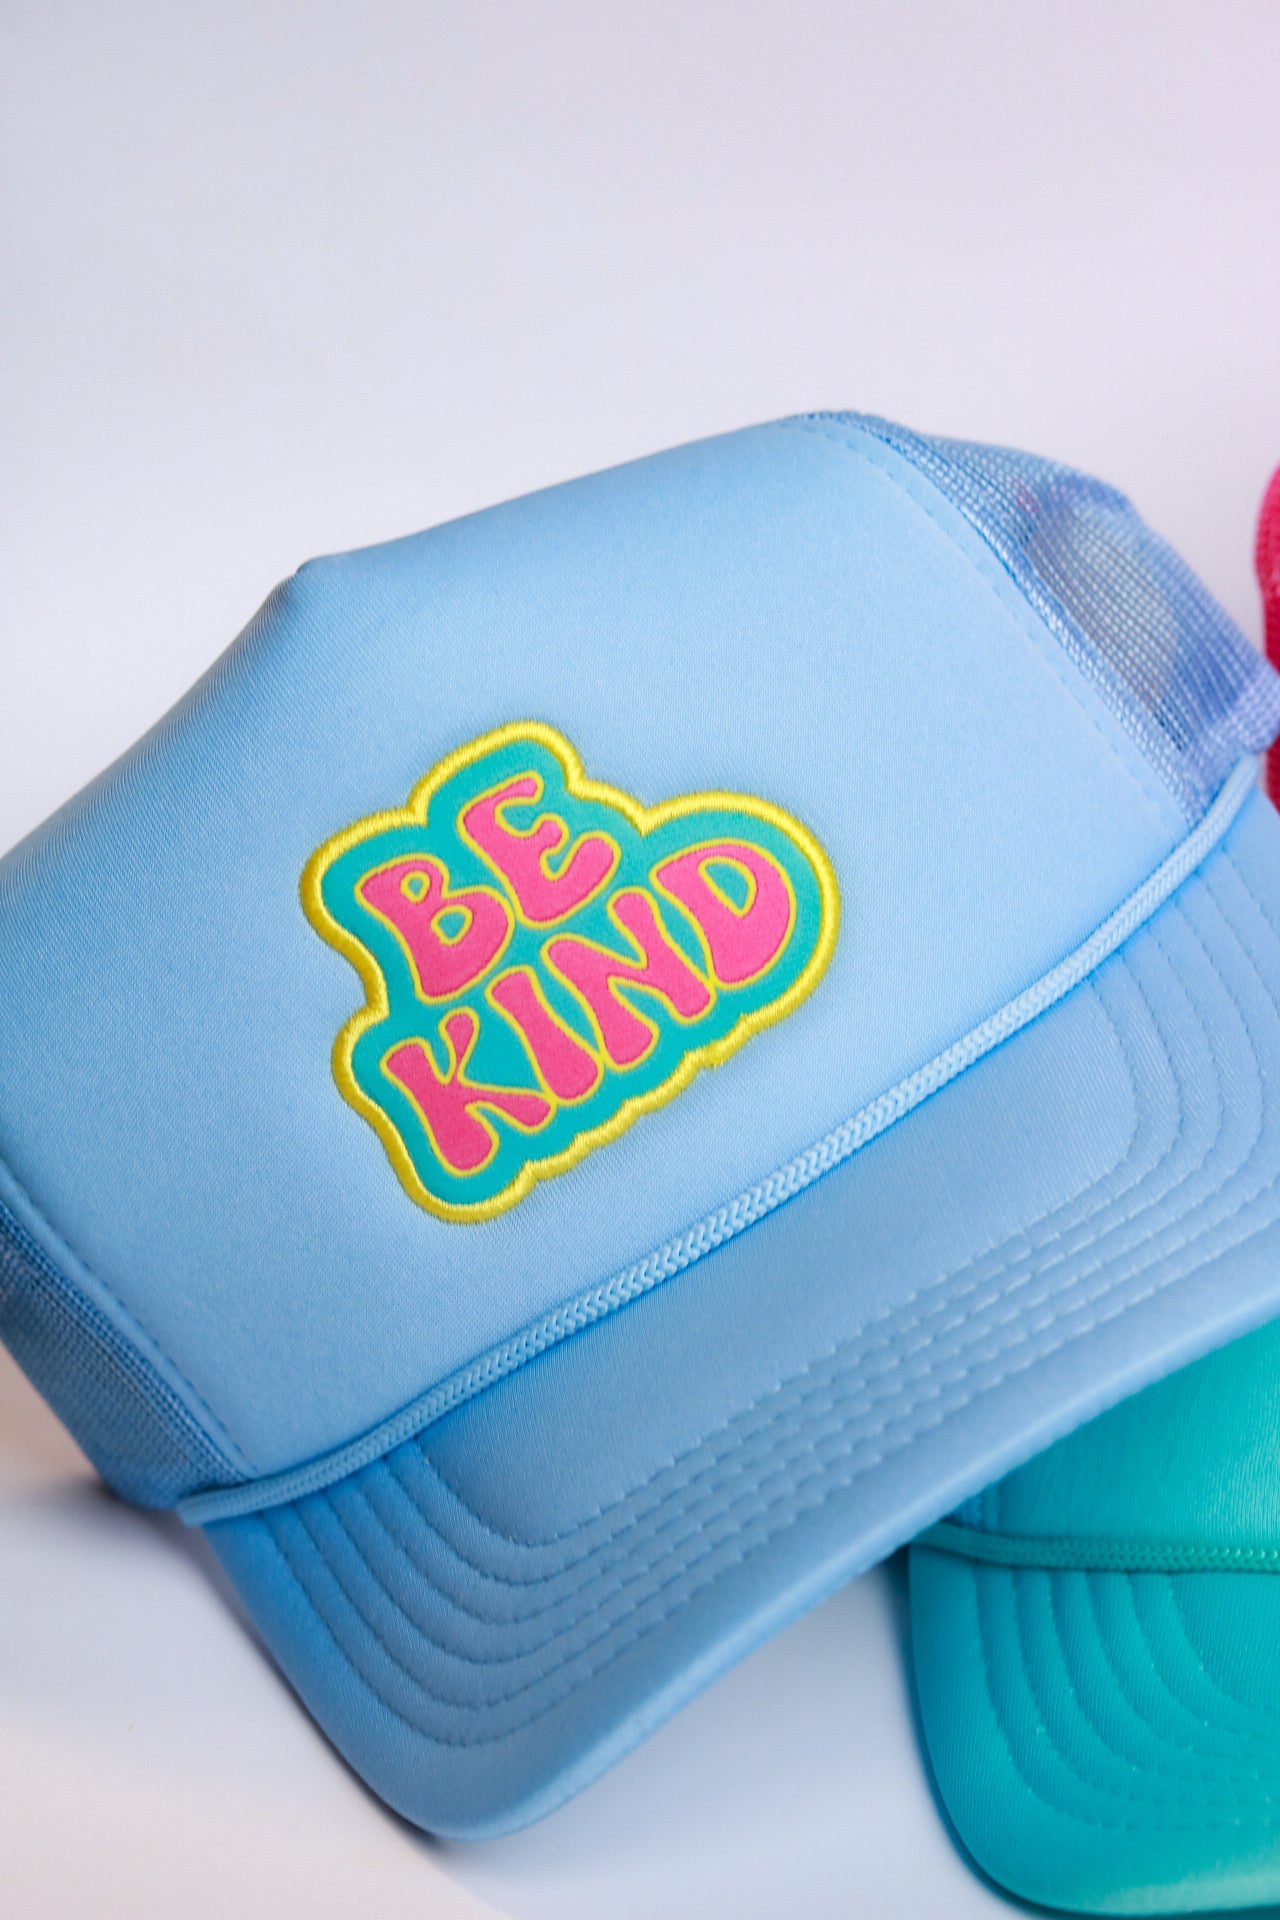 XOXO by magpies | Powder Blue Be Kind Trucker